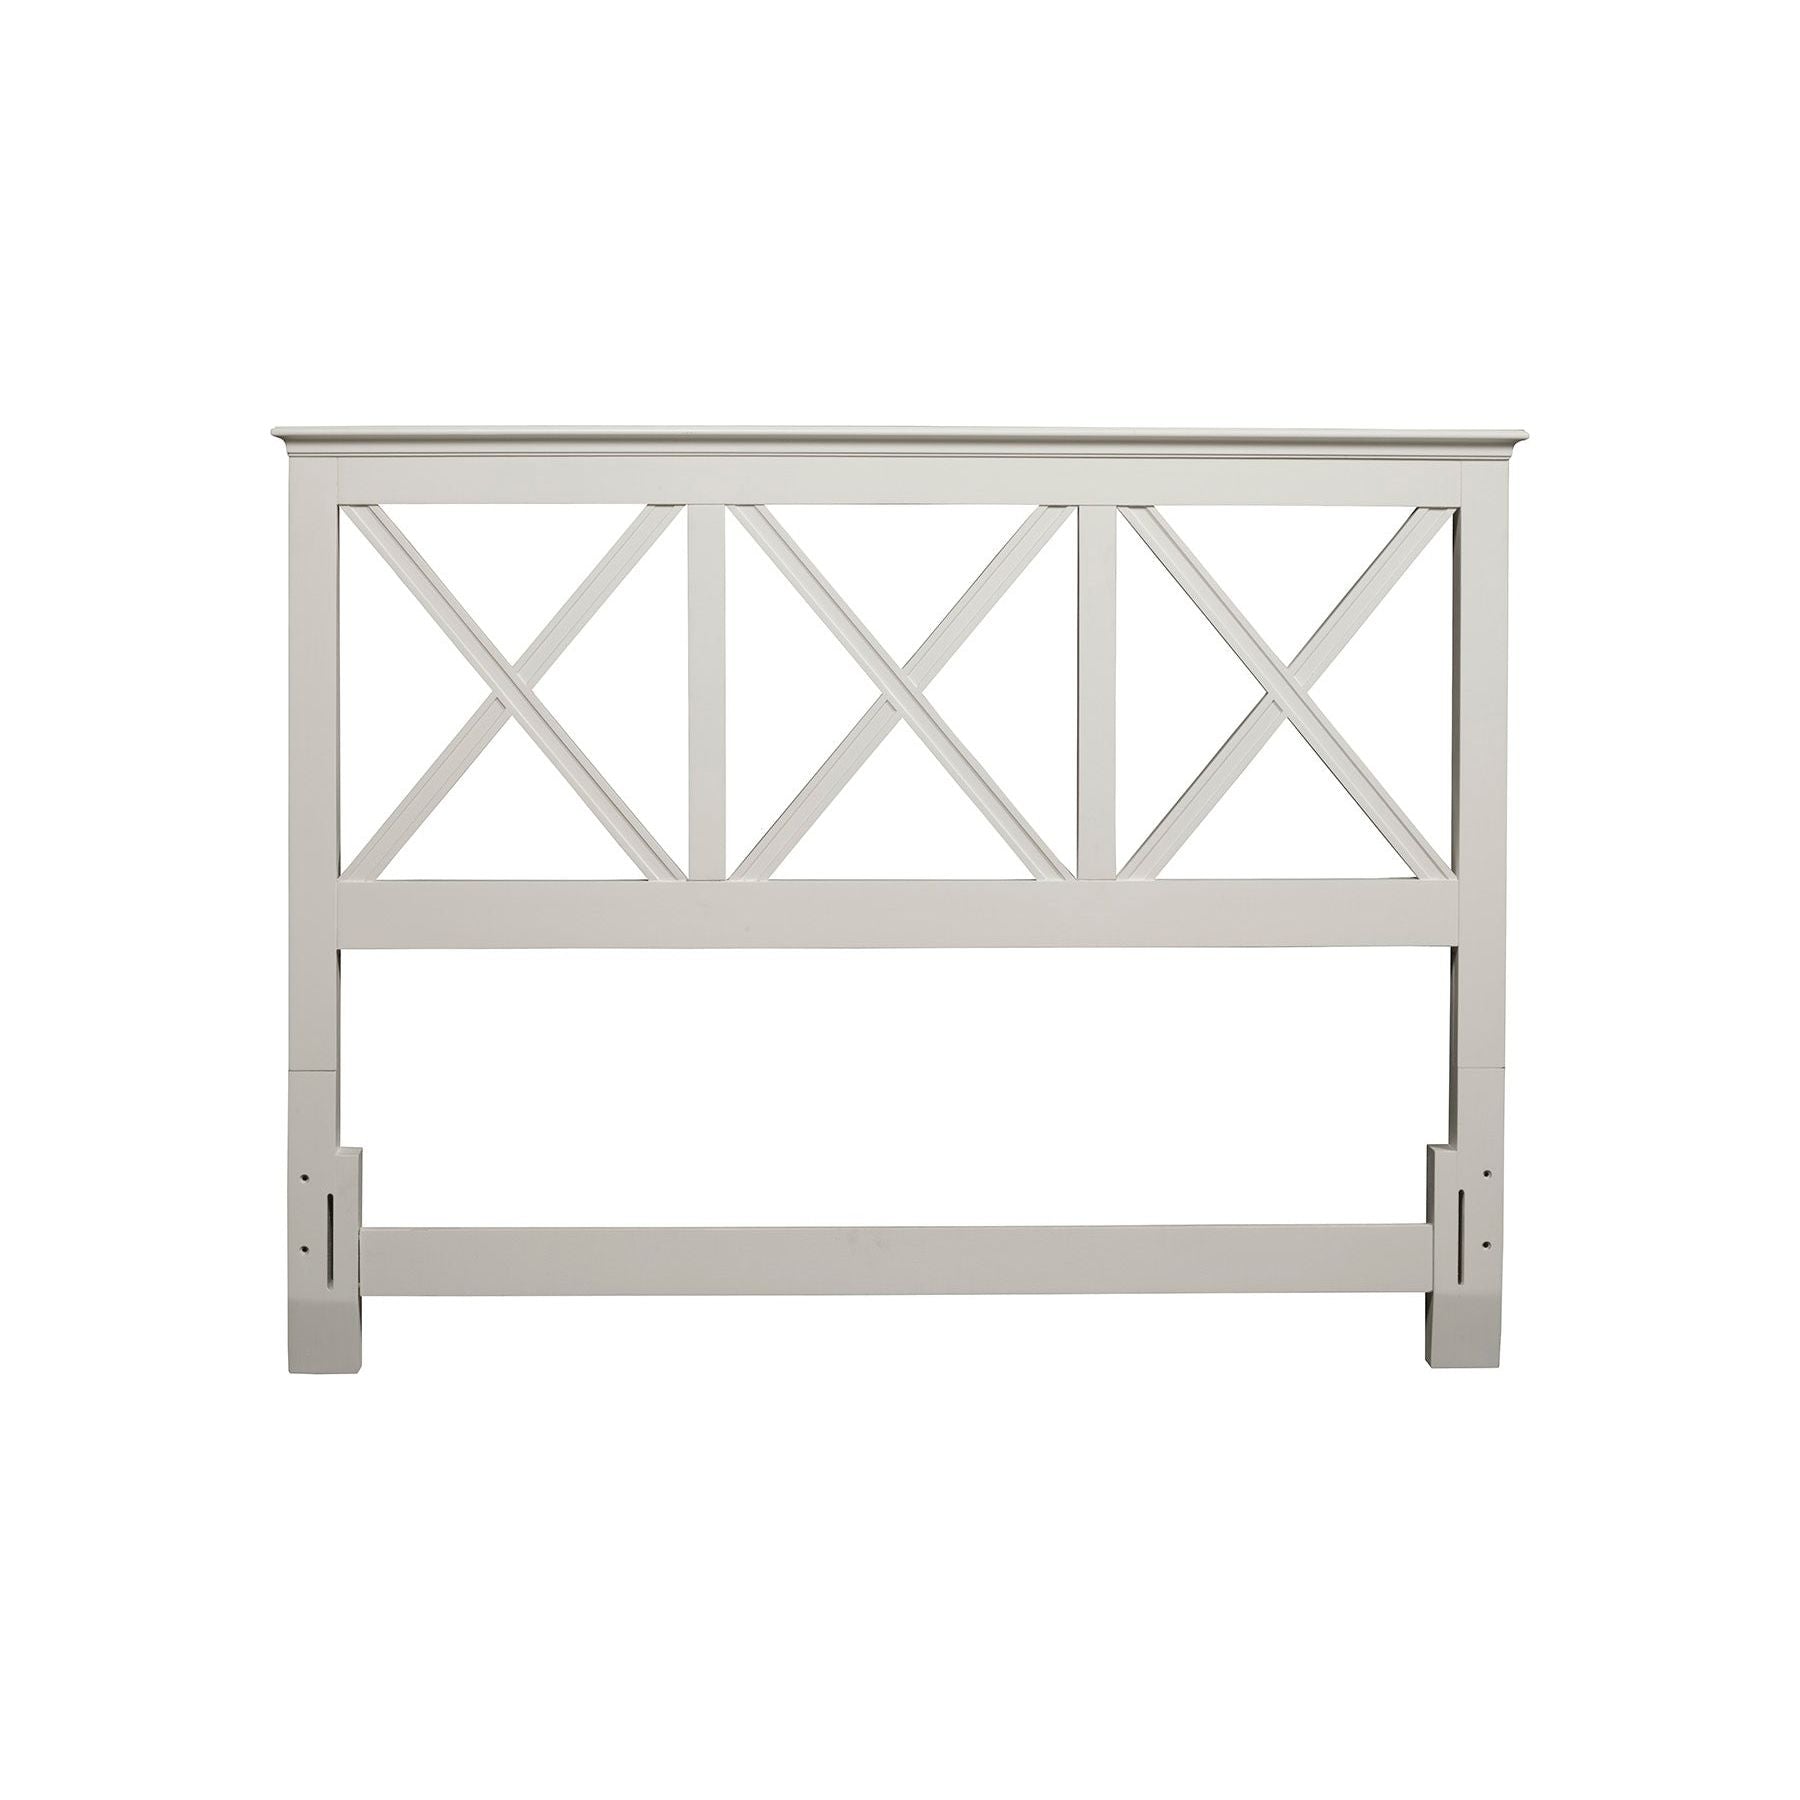 Potter Bed - Headboard Only, White - Alpine Furniture